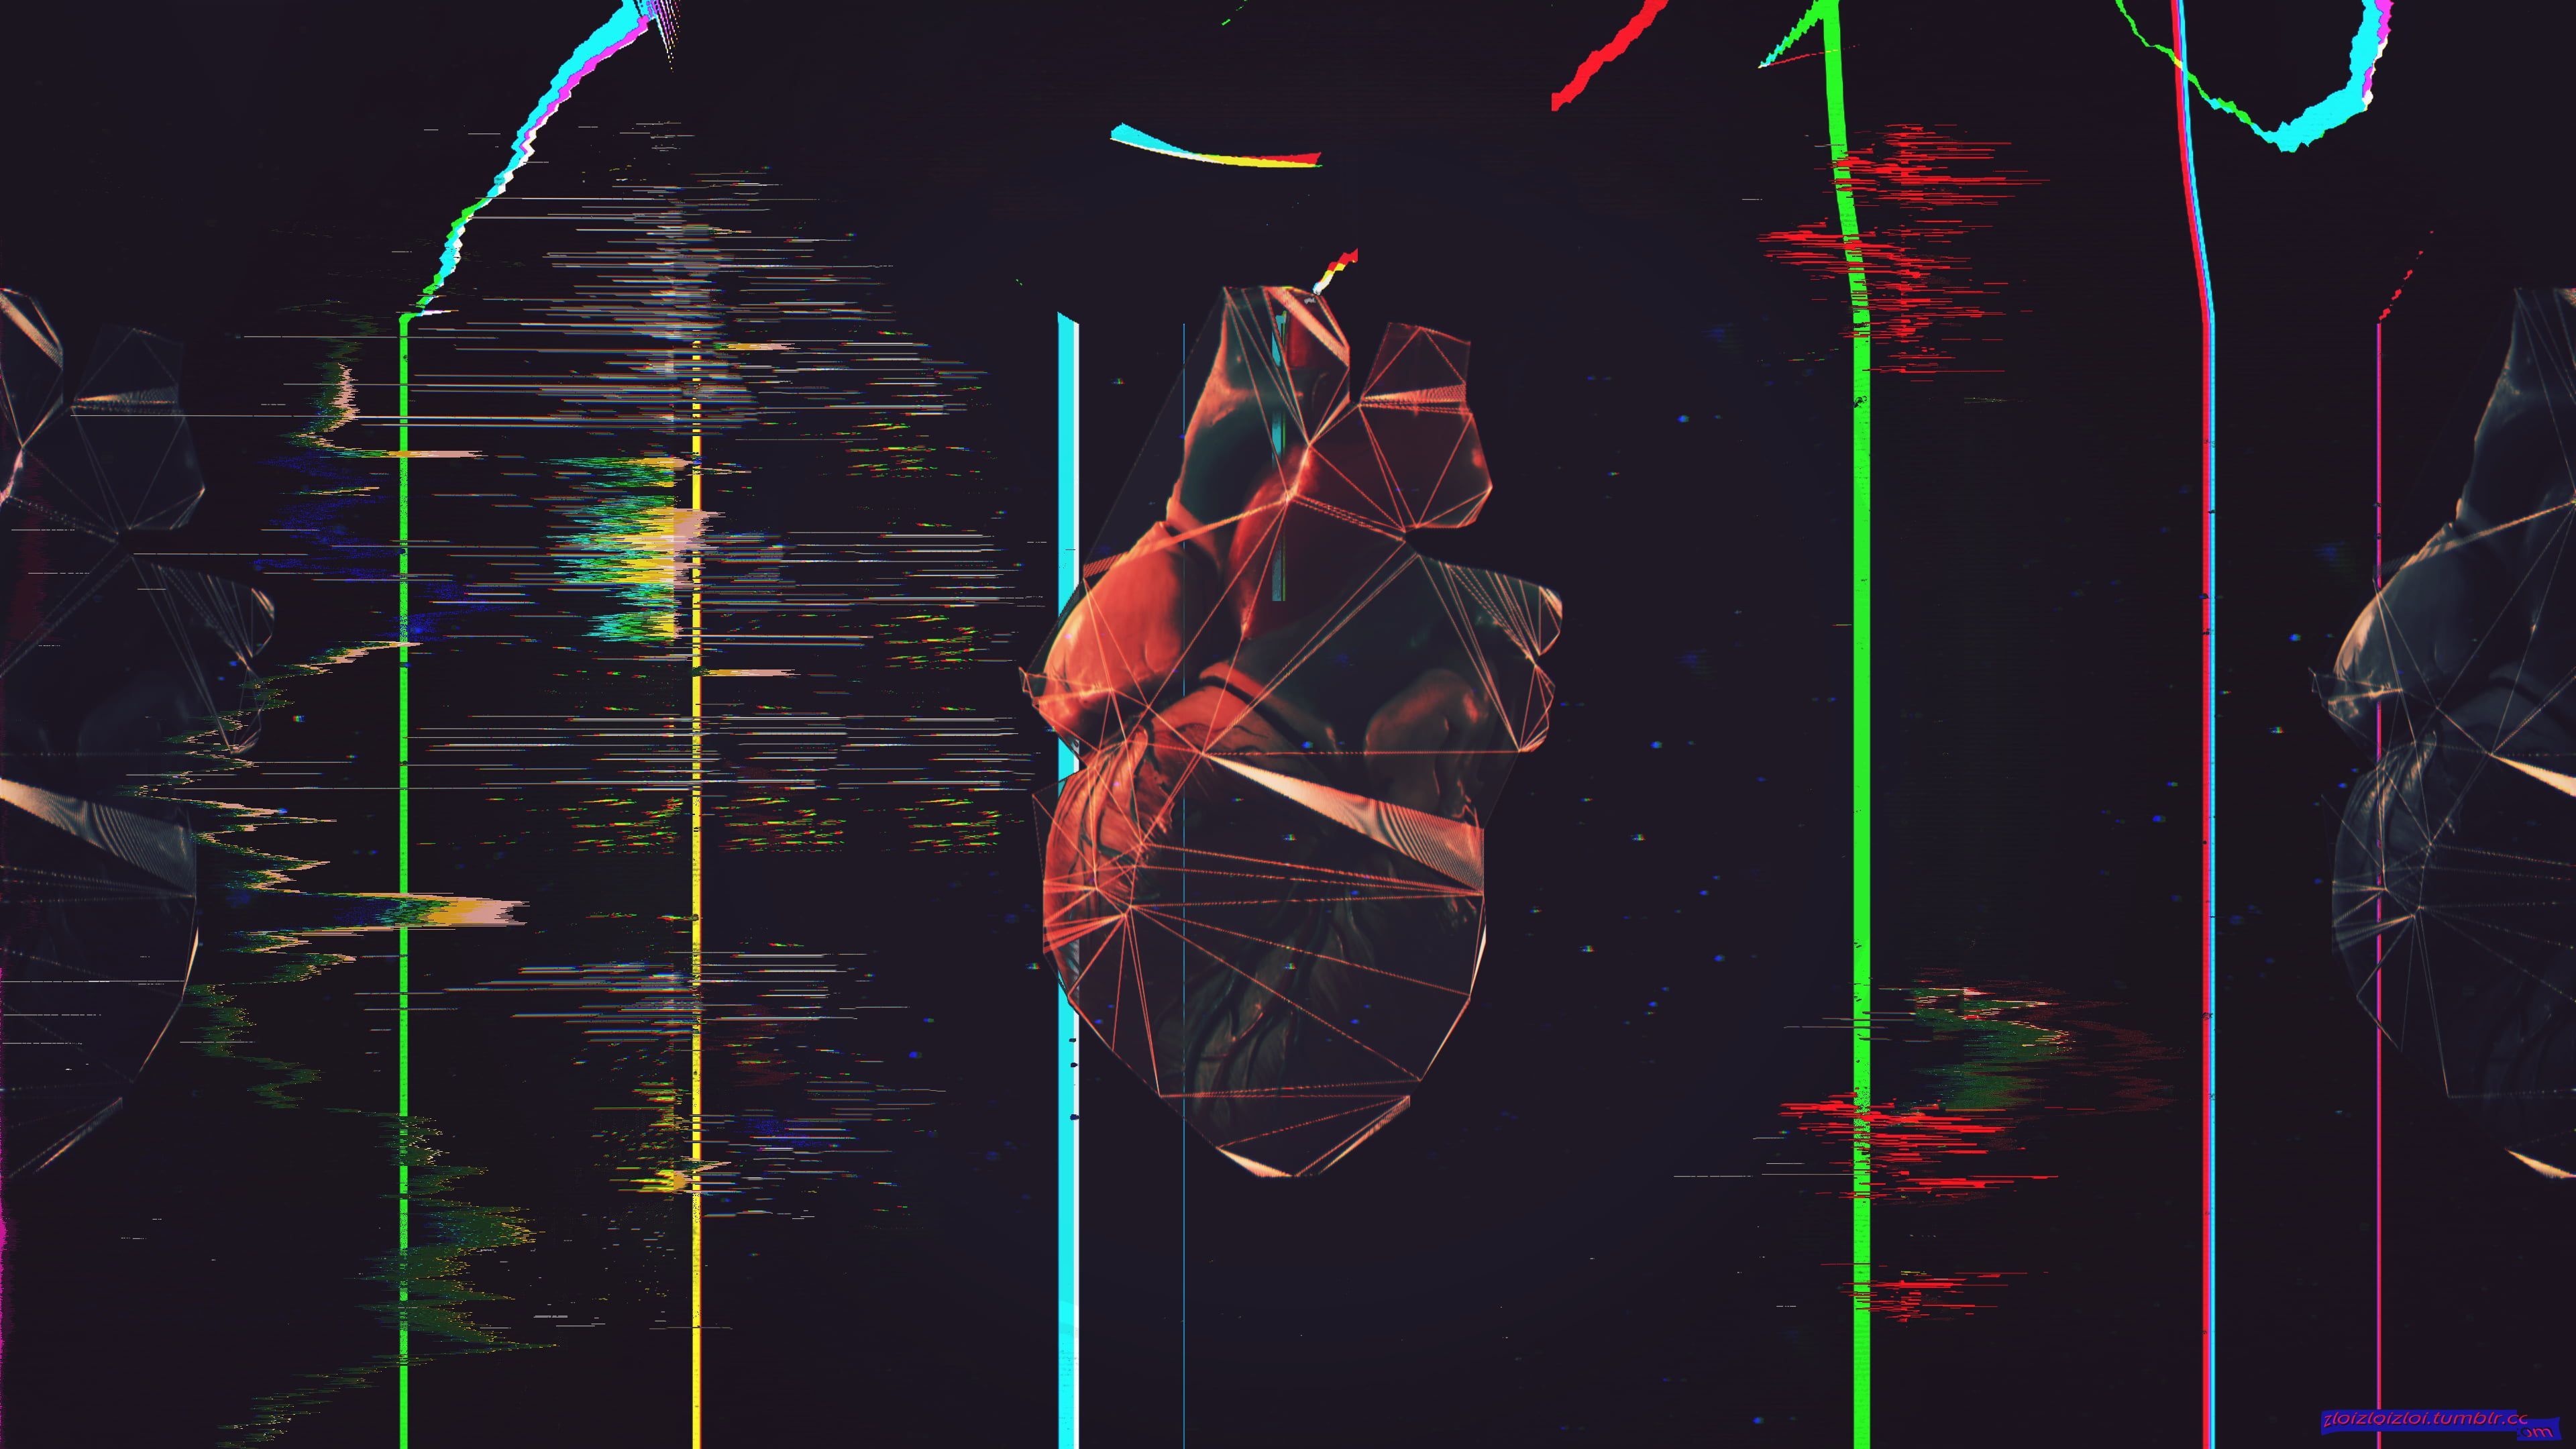 black and red human heart illustration glitch art polygon art low poly #abstract #heart K #wallpaper #hdwallpape. Polygon art, Glitch art, Desktop wallpaper art